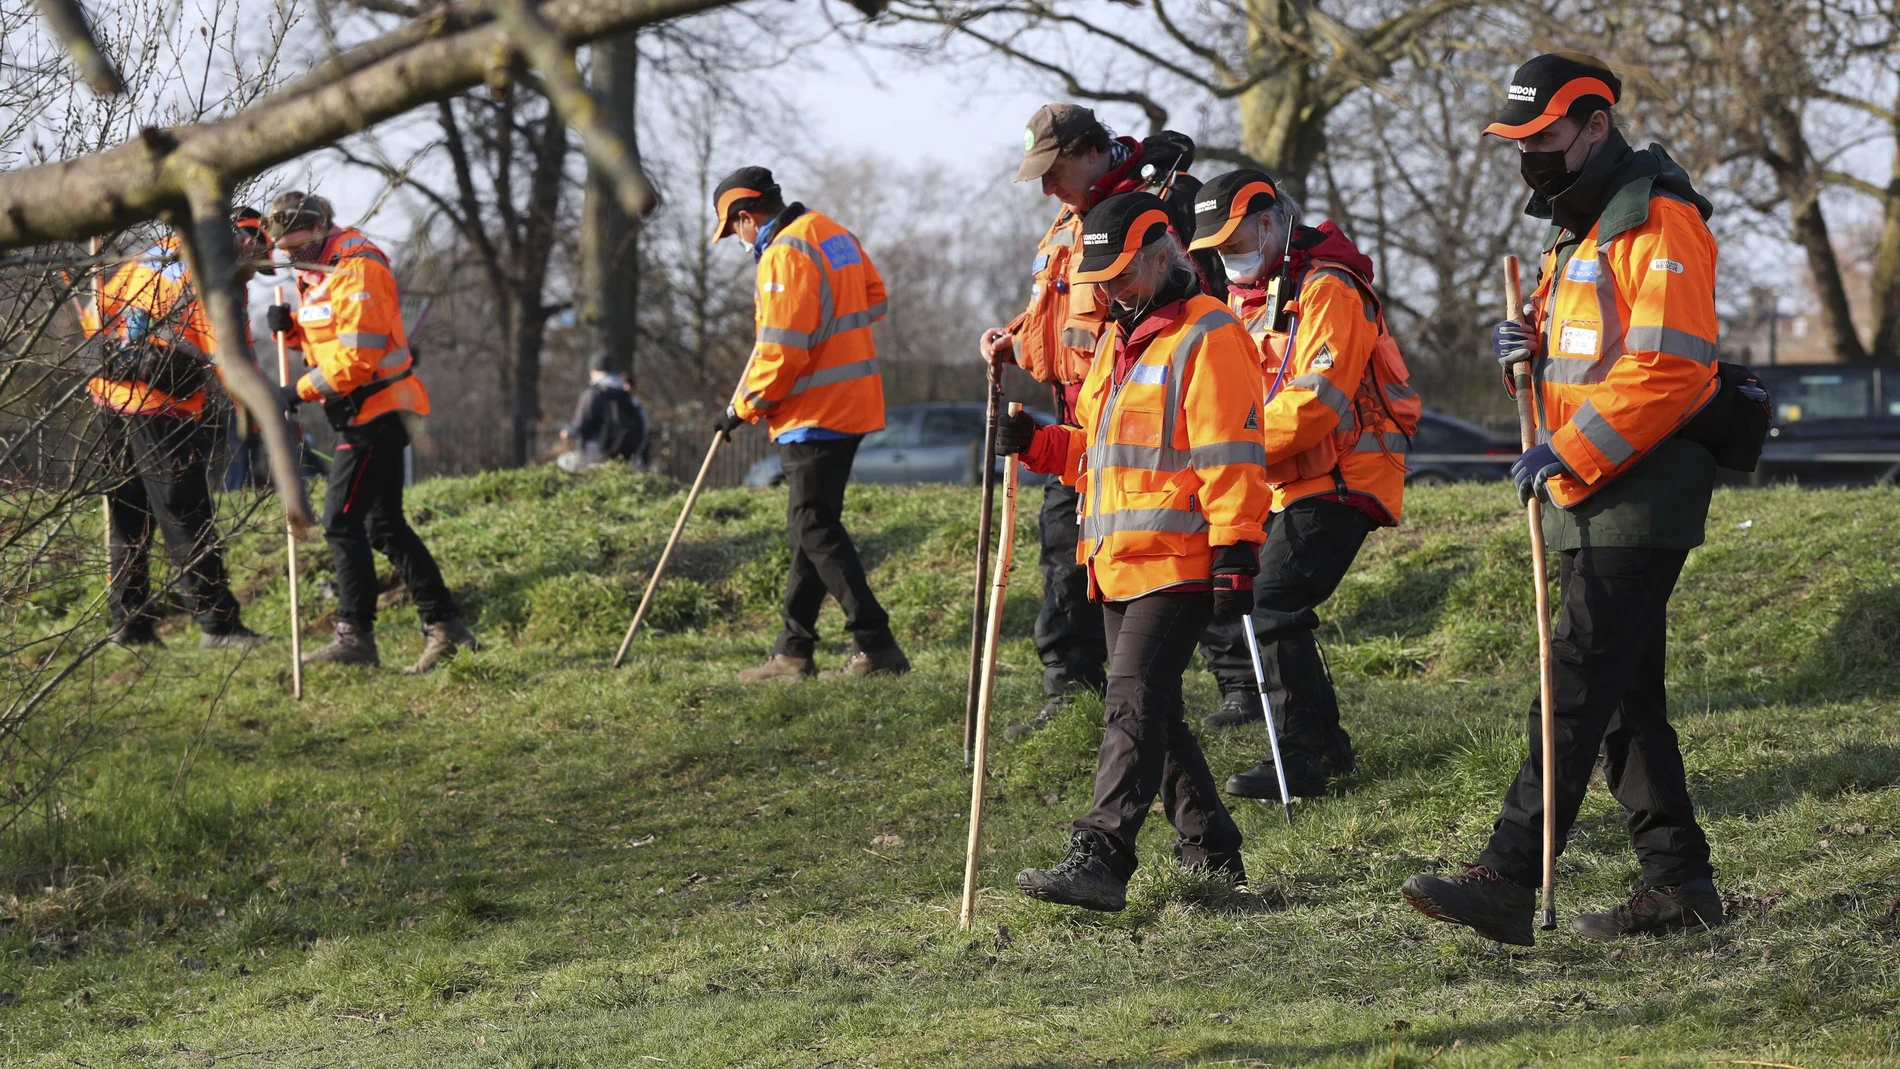 A search team near Eagle Pond on Clapham Common Sunday March 7, 2021, search for traces connected to missing 33-year old woman Sarah Everard, who has been missing since Wednesday. Everard left a friend's house in Clapham, south London, on Wednesday evening to walk home has not been seen or heard from since. (Jonathan Brady/PA via AP)